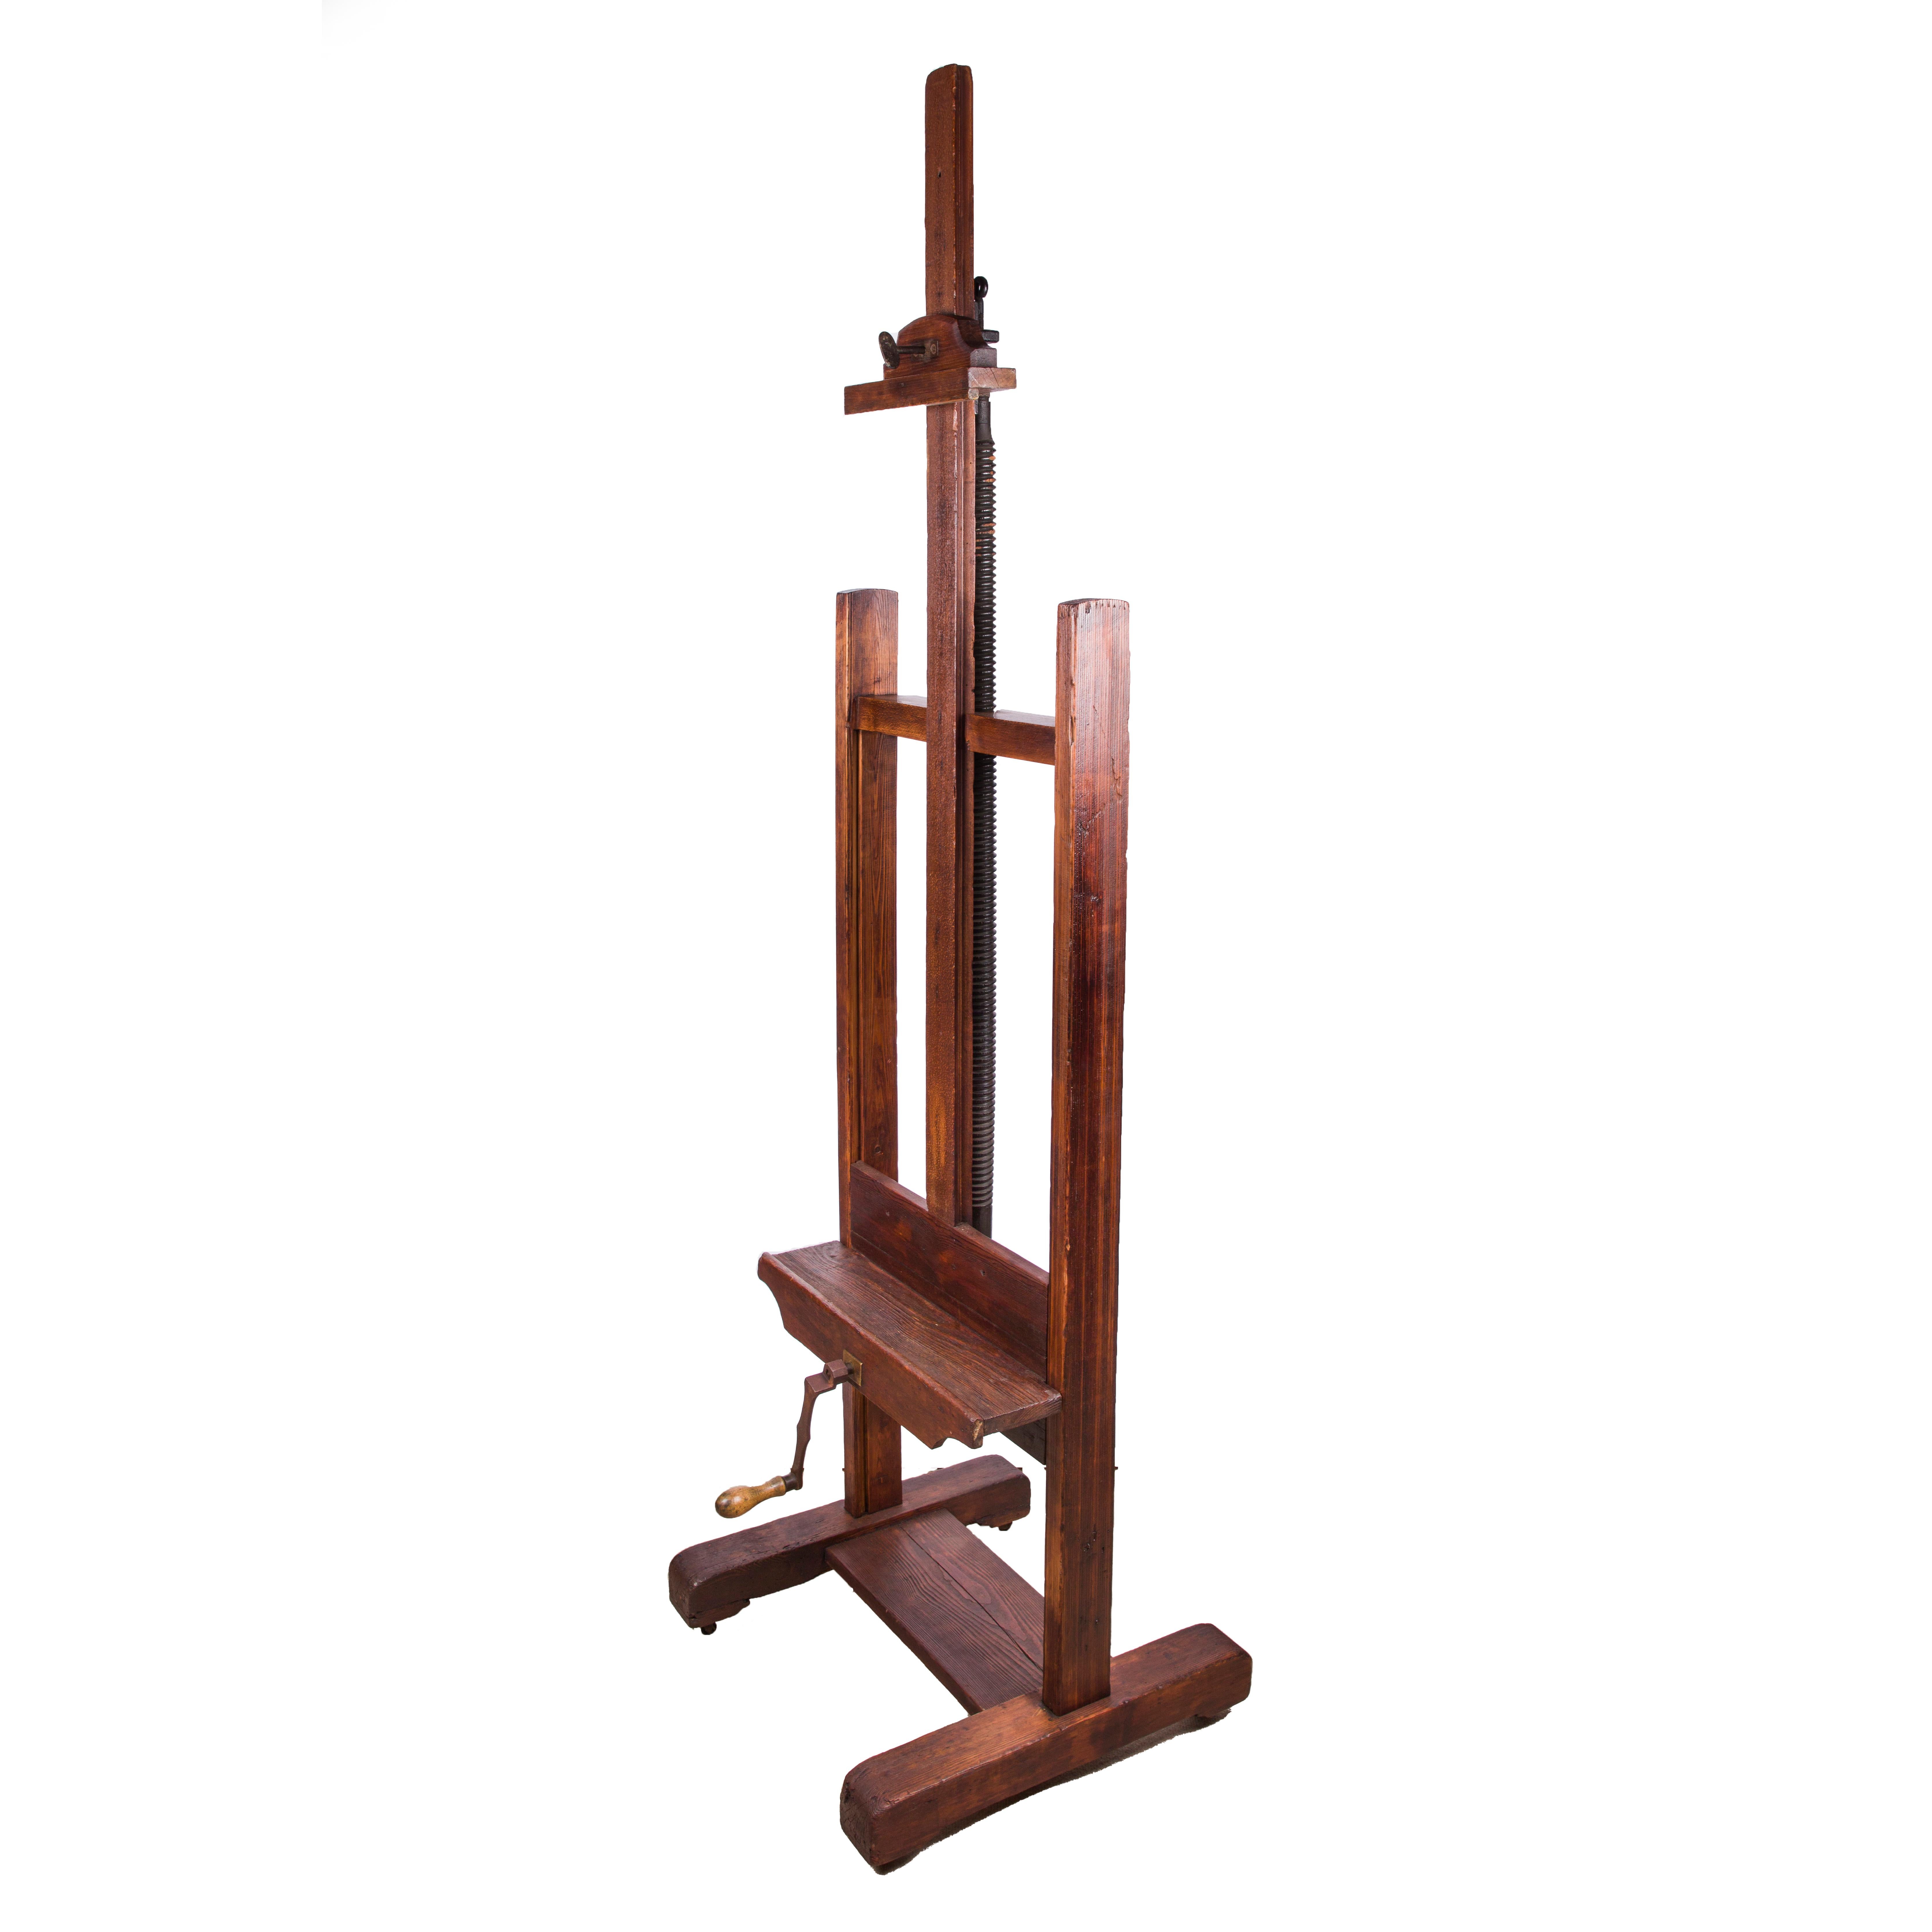 A Victorian oak H-frame artist's studio easel of adjustable height.

The height of the easel in the photographs is 80 inches - 203 cm, this height can be adjusted by using the hand cranked mechanism. Original iron and turned wood handle.

The